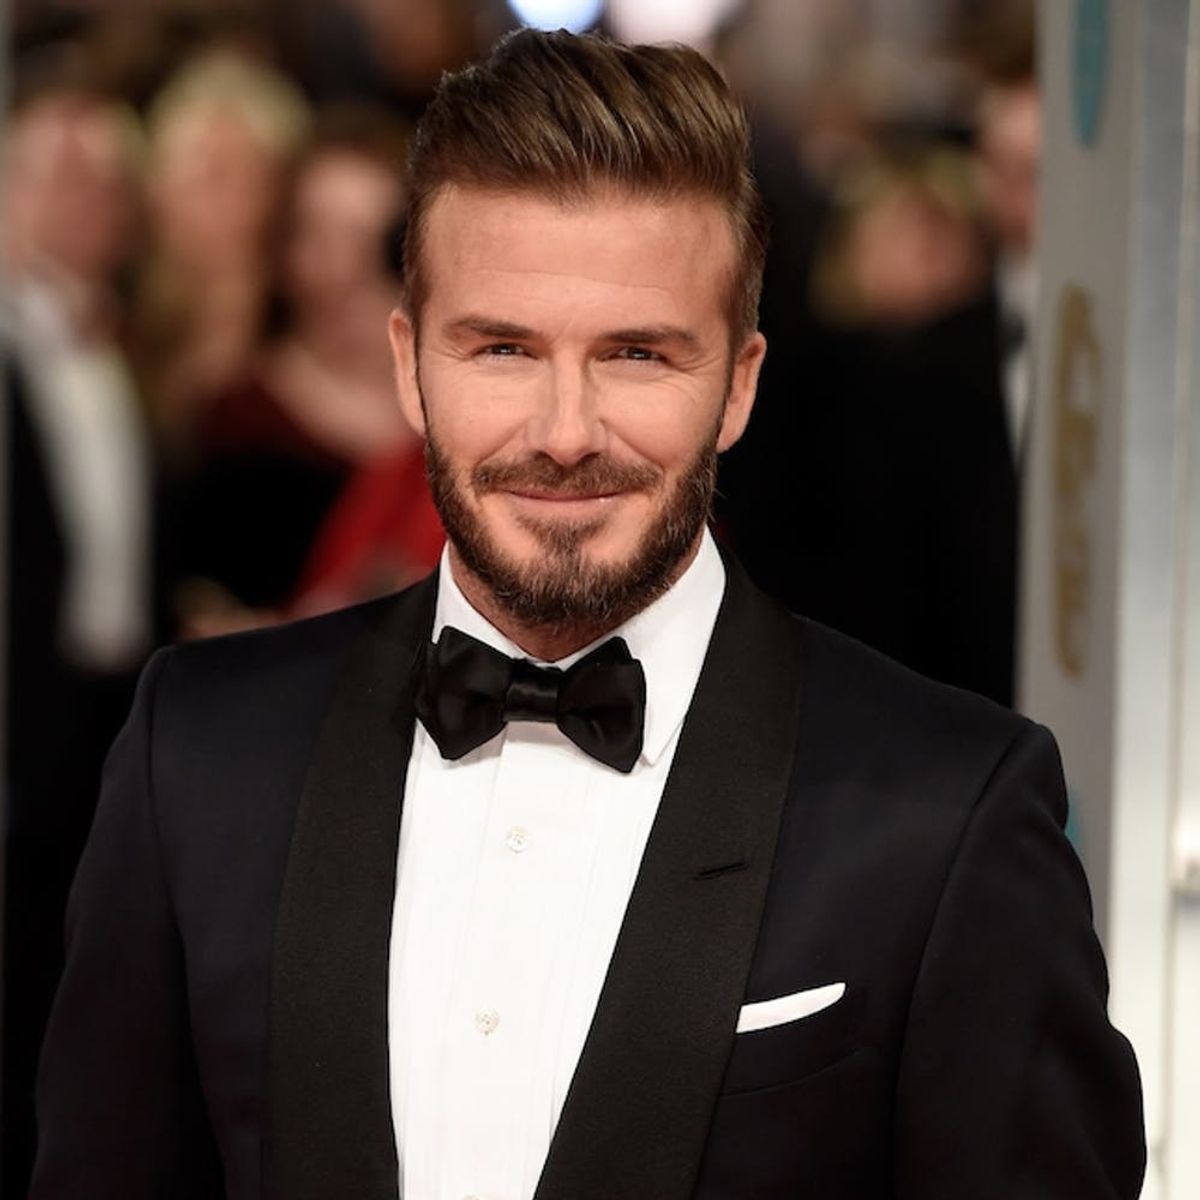 5 Times David Beckham Was the Sexiest Man Alive *WITH* His Shirt On